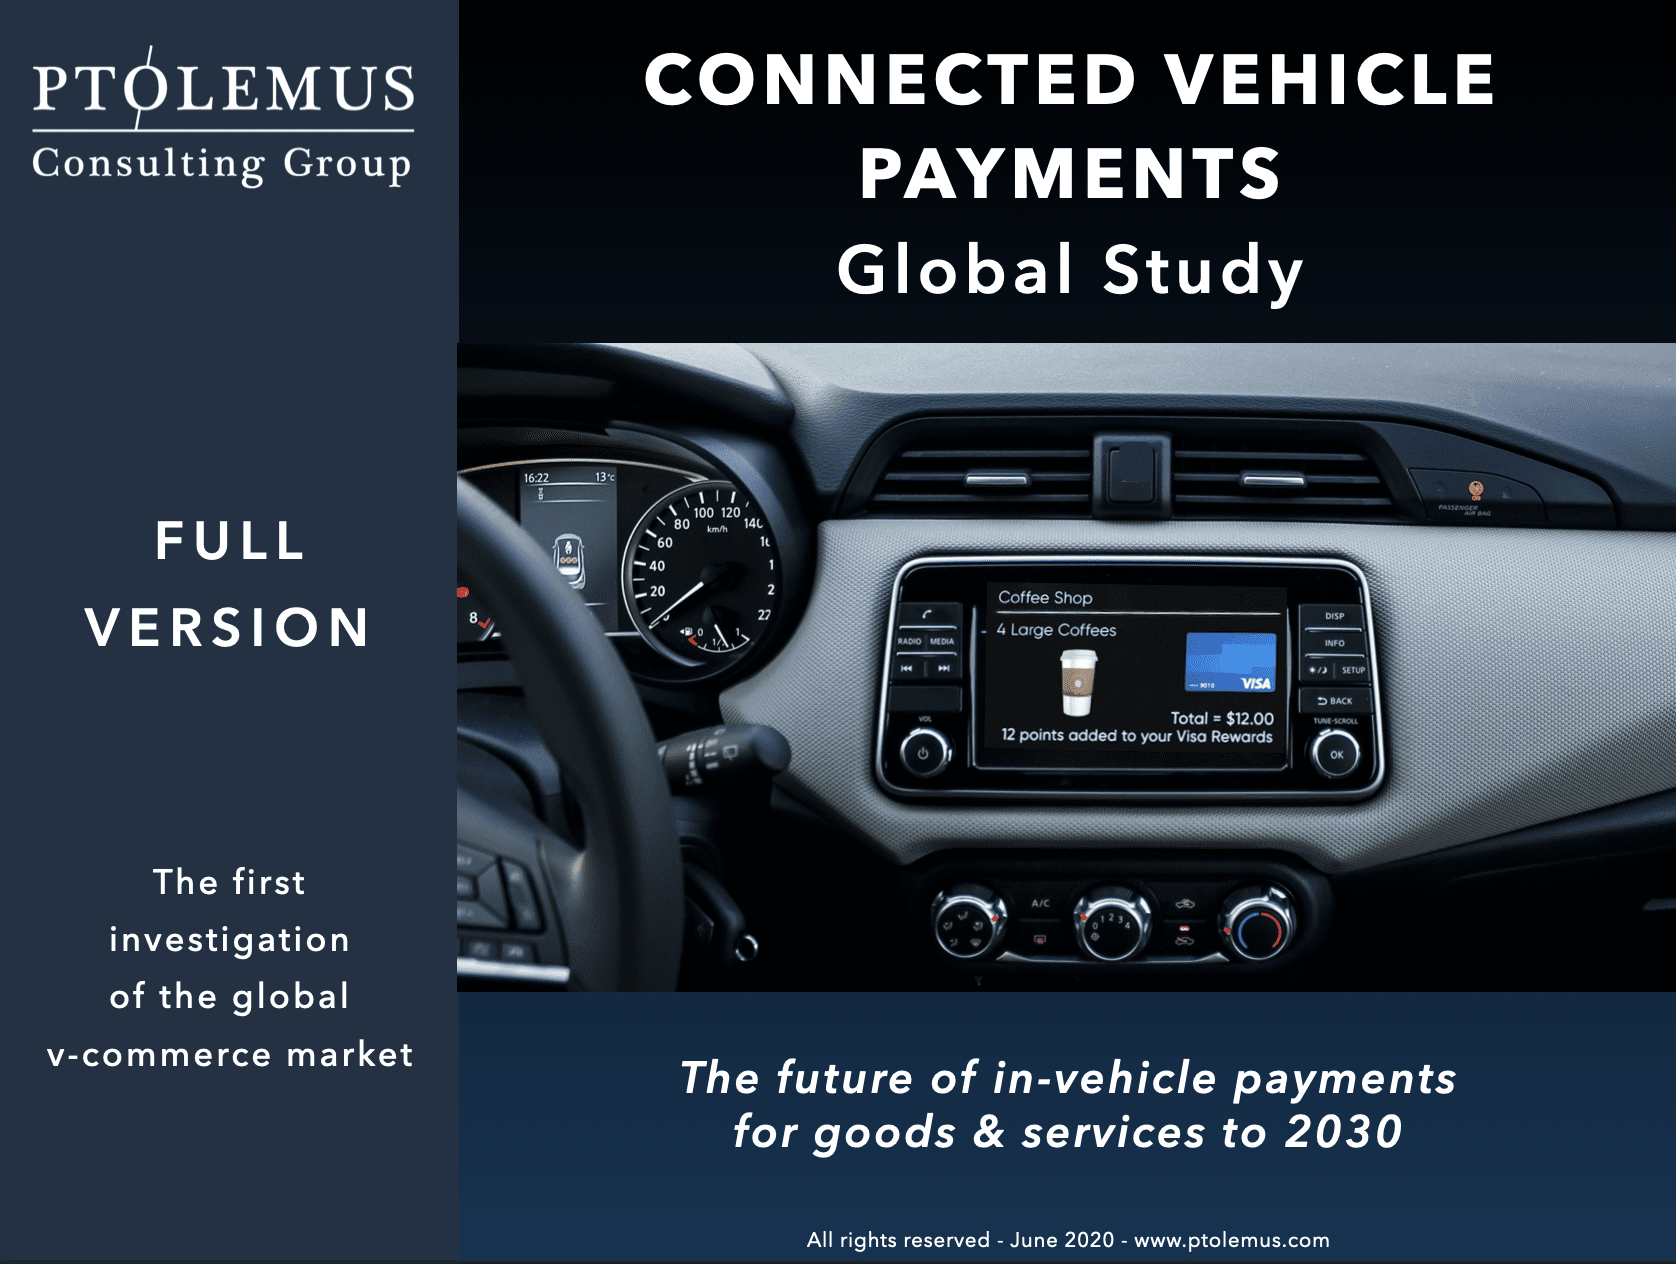 Connected vehicle payments